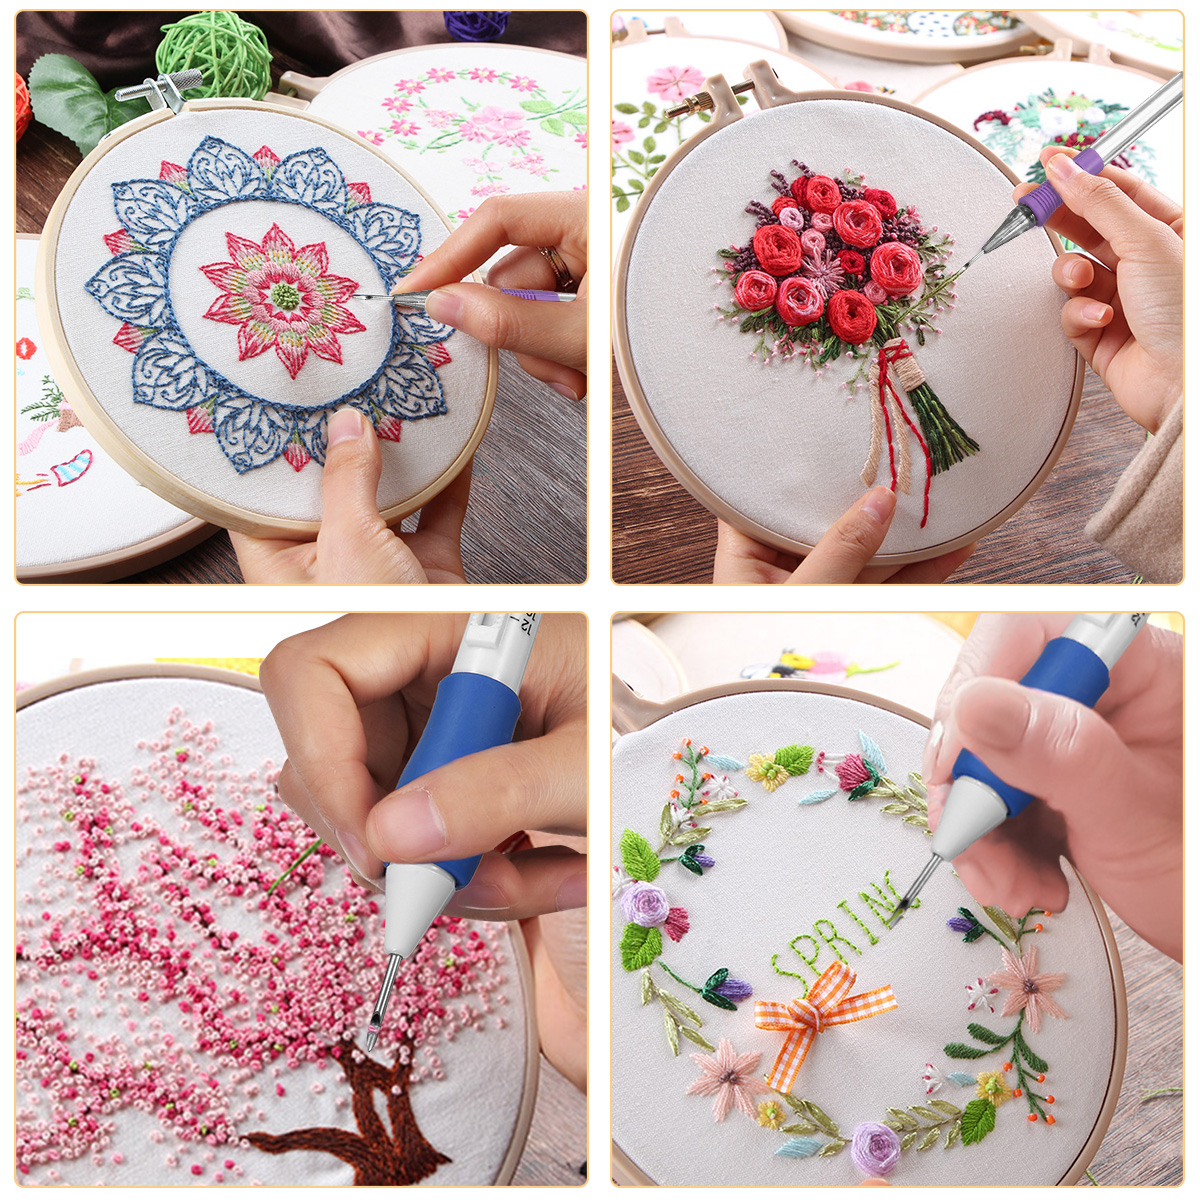 Diy Embroidery Patterns Magic Embroidery Pen Punch Needle Set Embroidery Patterns Punch Needle Kit Knitting Sewing Diy Tool